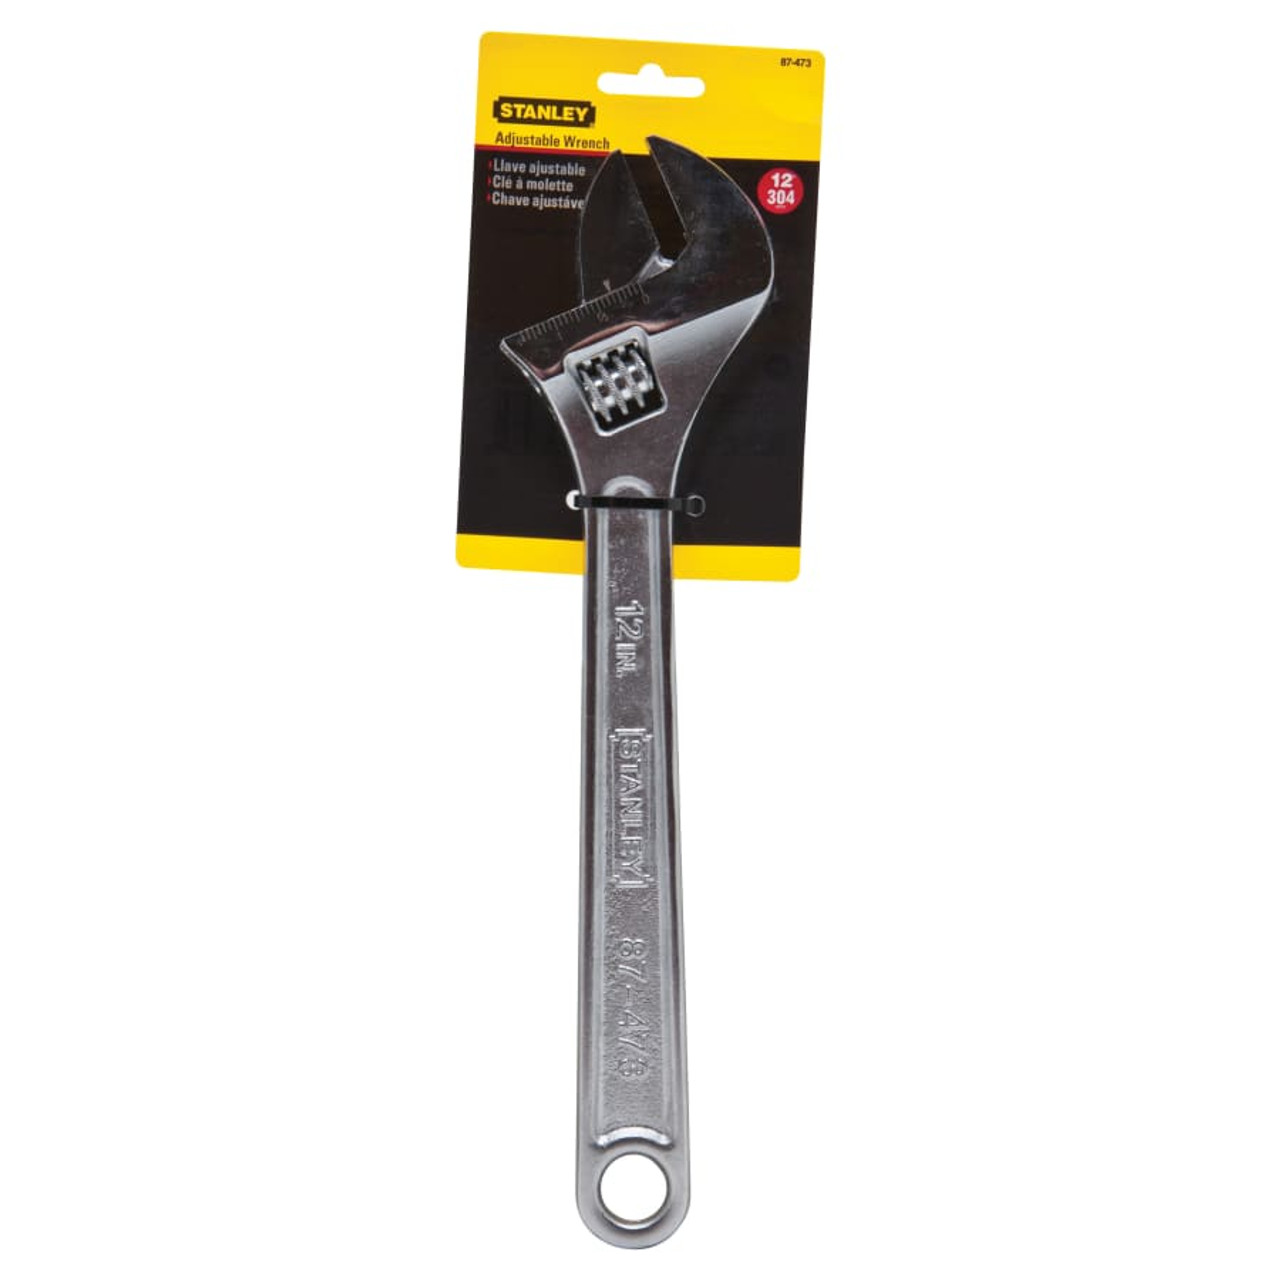 Adjustable Wrench, 12 in Long, 1-3/8 in Opening